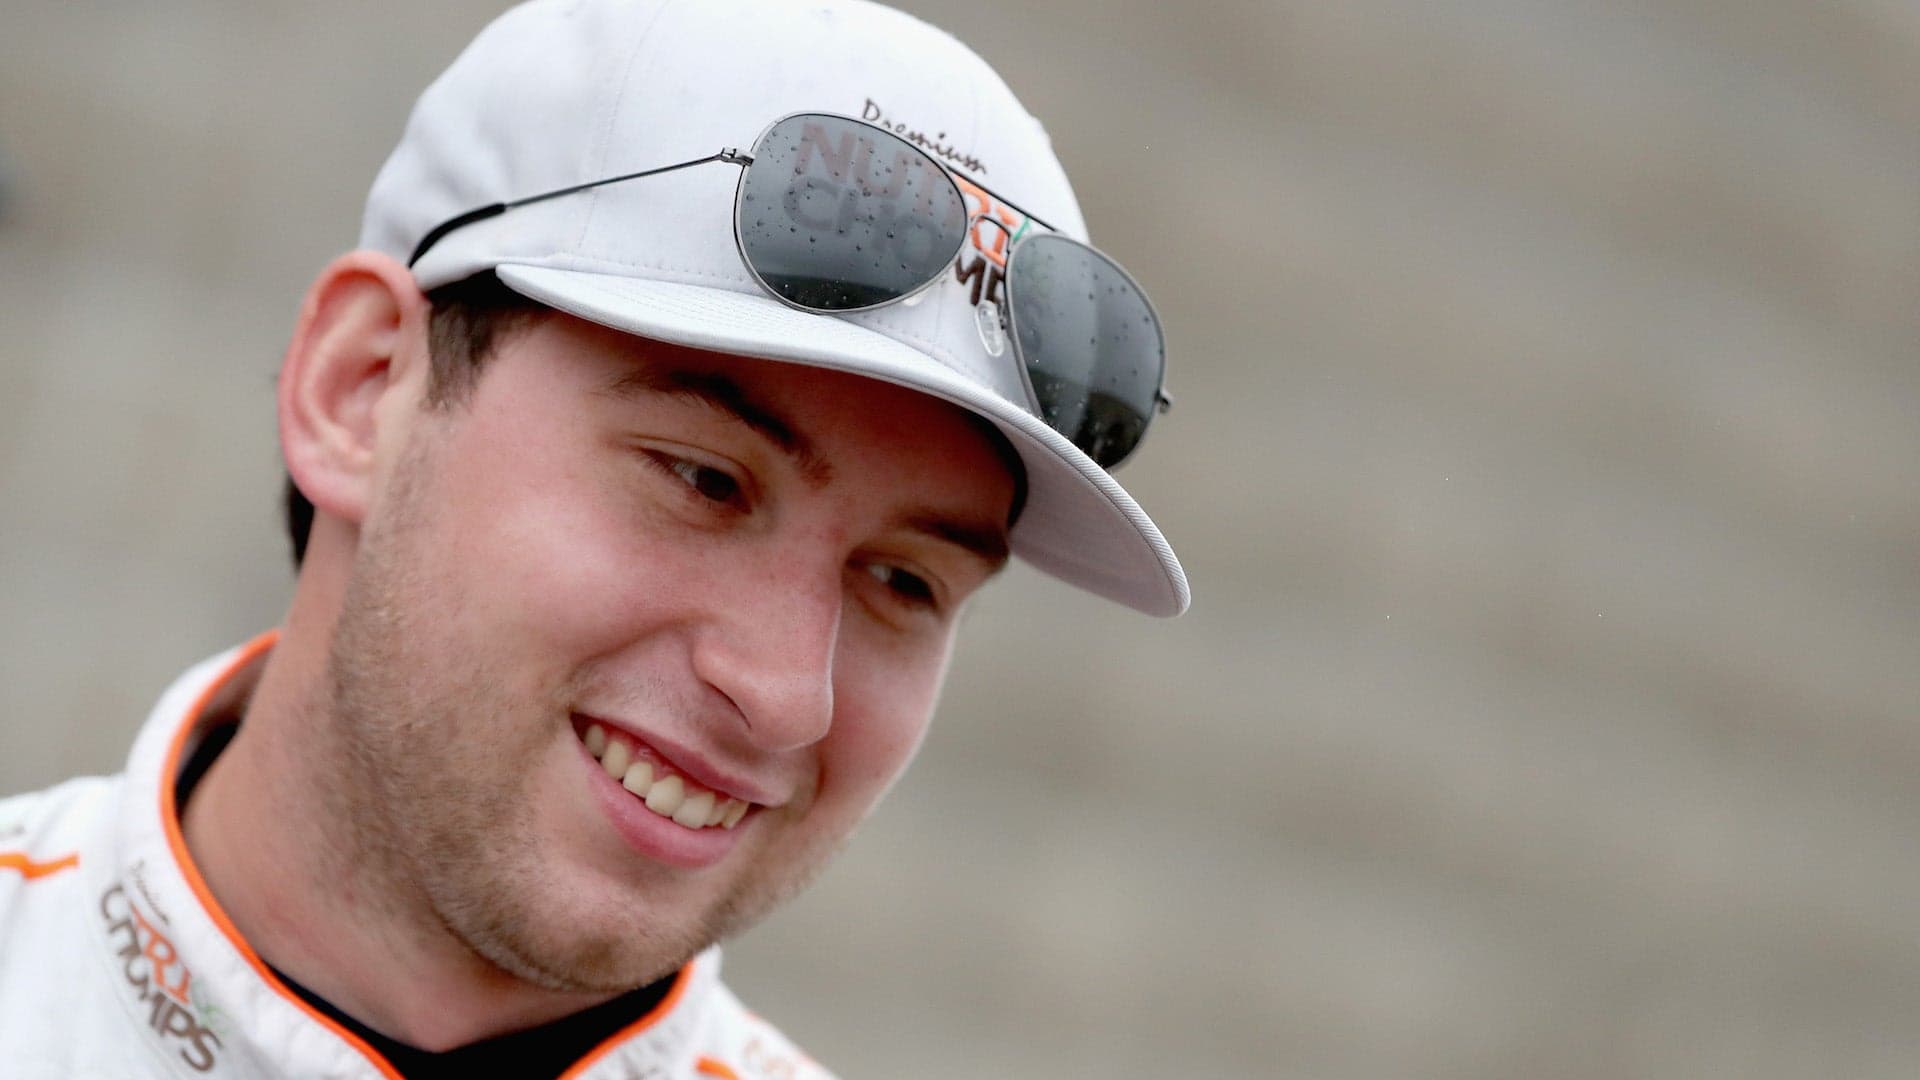 Chase Briscoe Joins Stewart-Haas Racing for Full-Time NASCAR Xfinity Series Gig